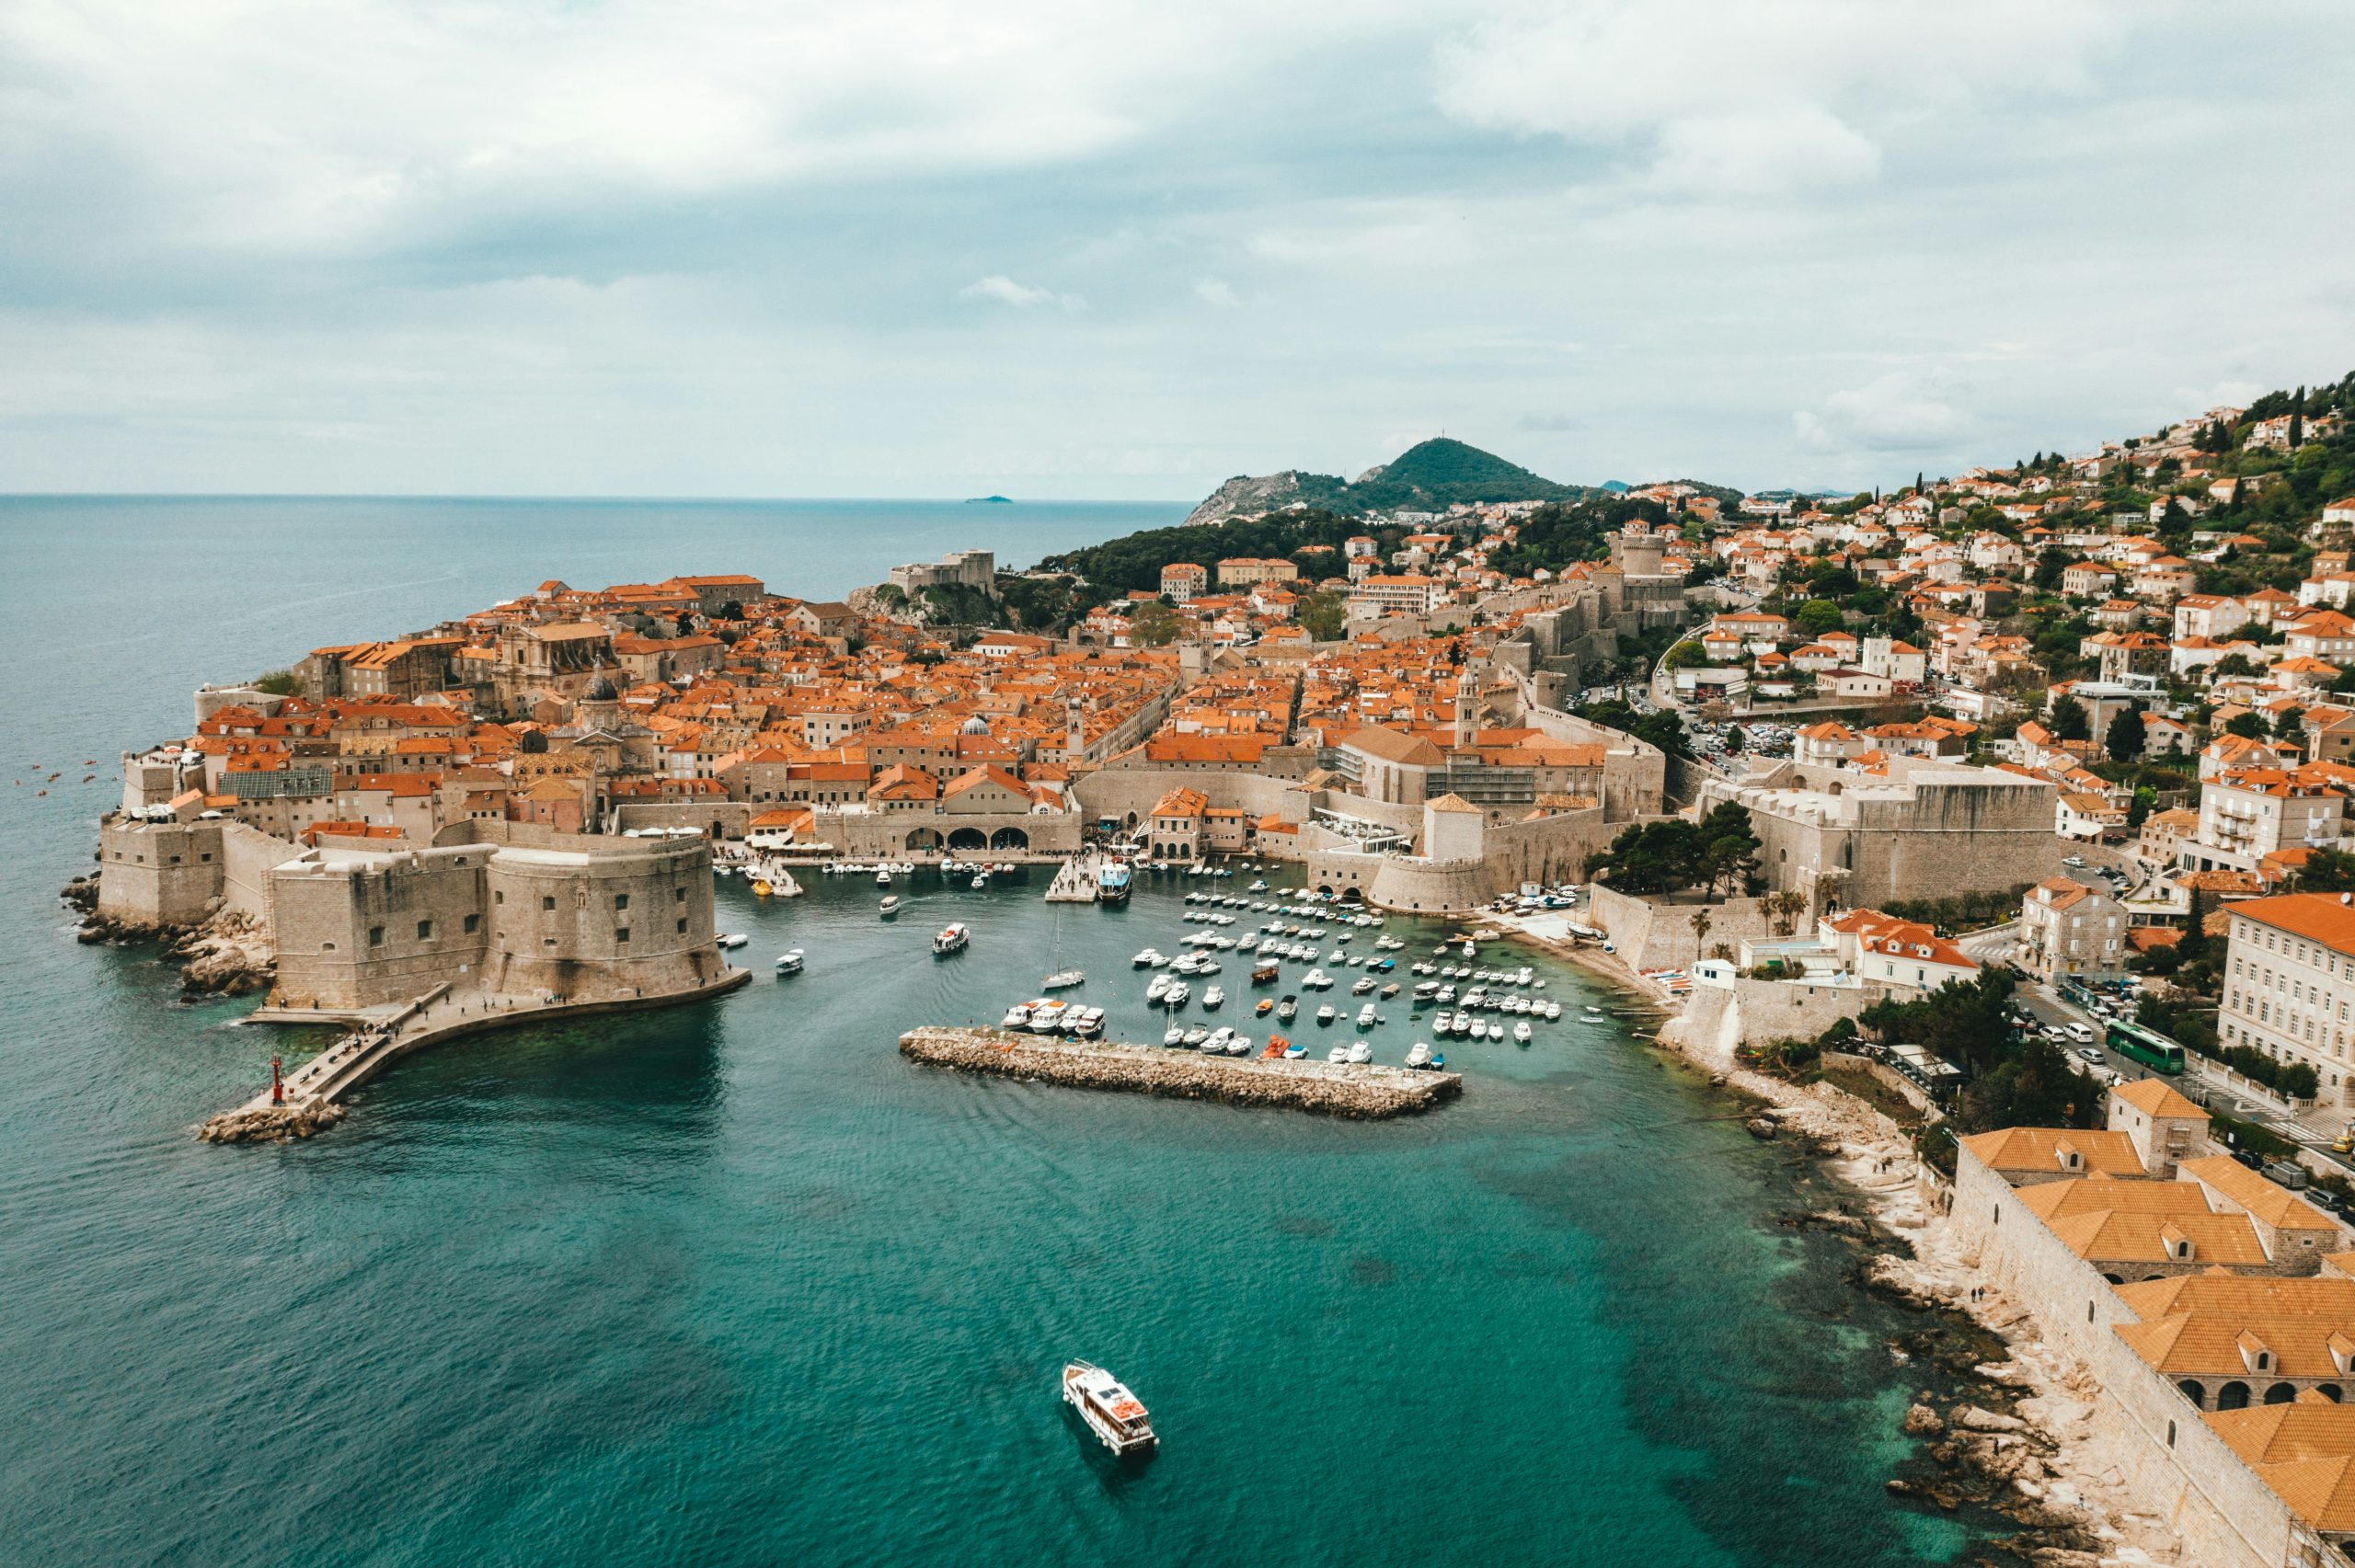 Featured image of Dubrovnik Old Town